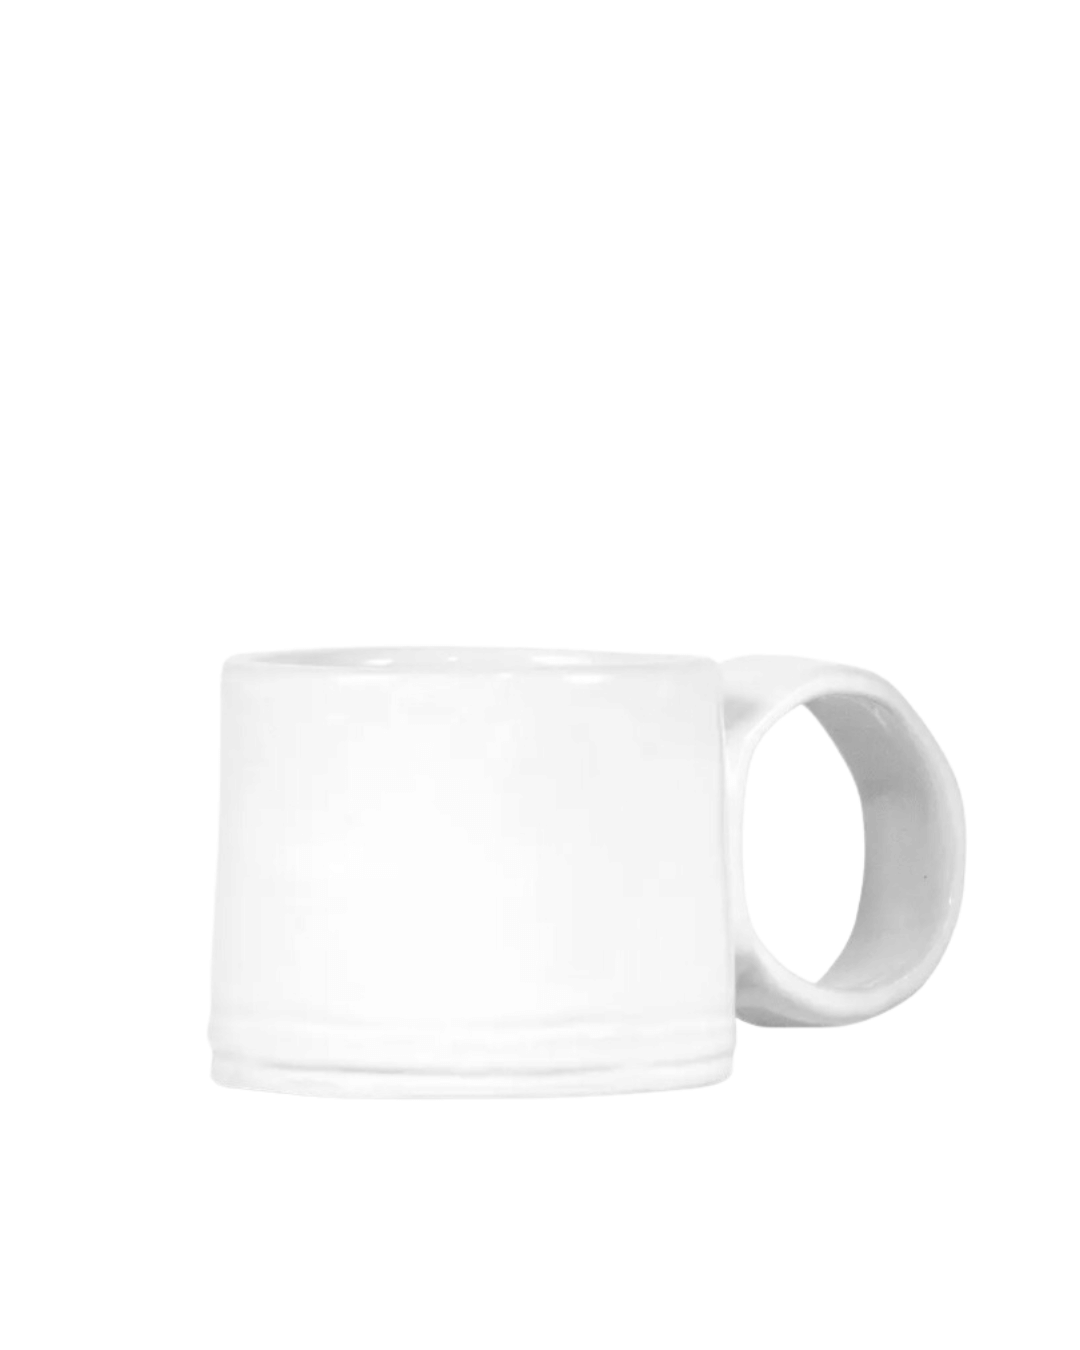 A Montes Doggett Espresso Cup No. 926 with a visible handle, displayed against a white background, creating a minimalistic look reminiscent of a Scottsdale Arizona bungalow.